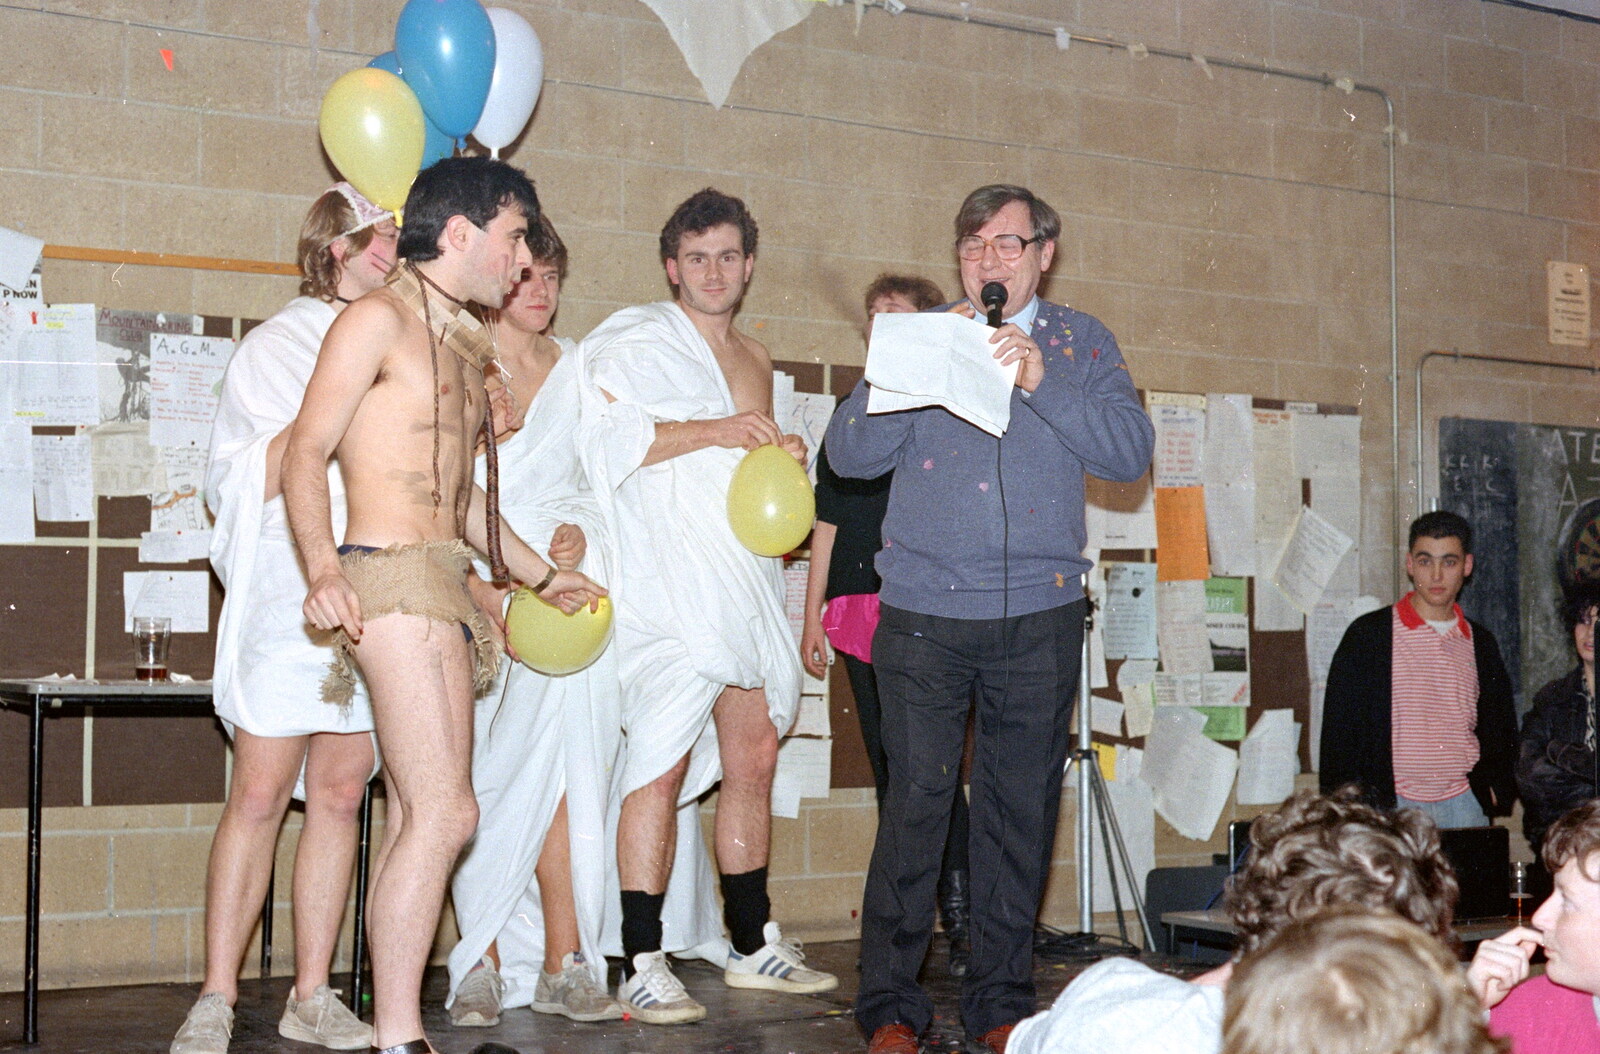 Martin's in a toga now from Uni: The PPSU "Jazz" RAG Review and Charity Auction, Plymouth, Devon - 19th February 1986